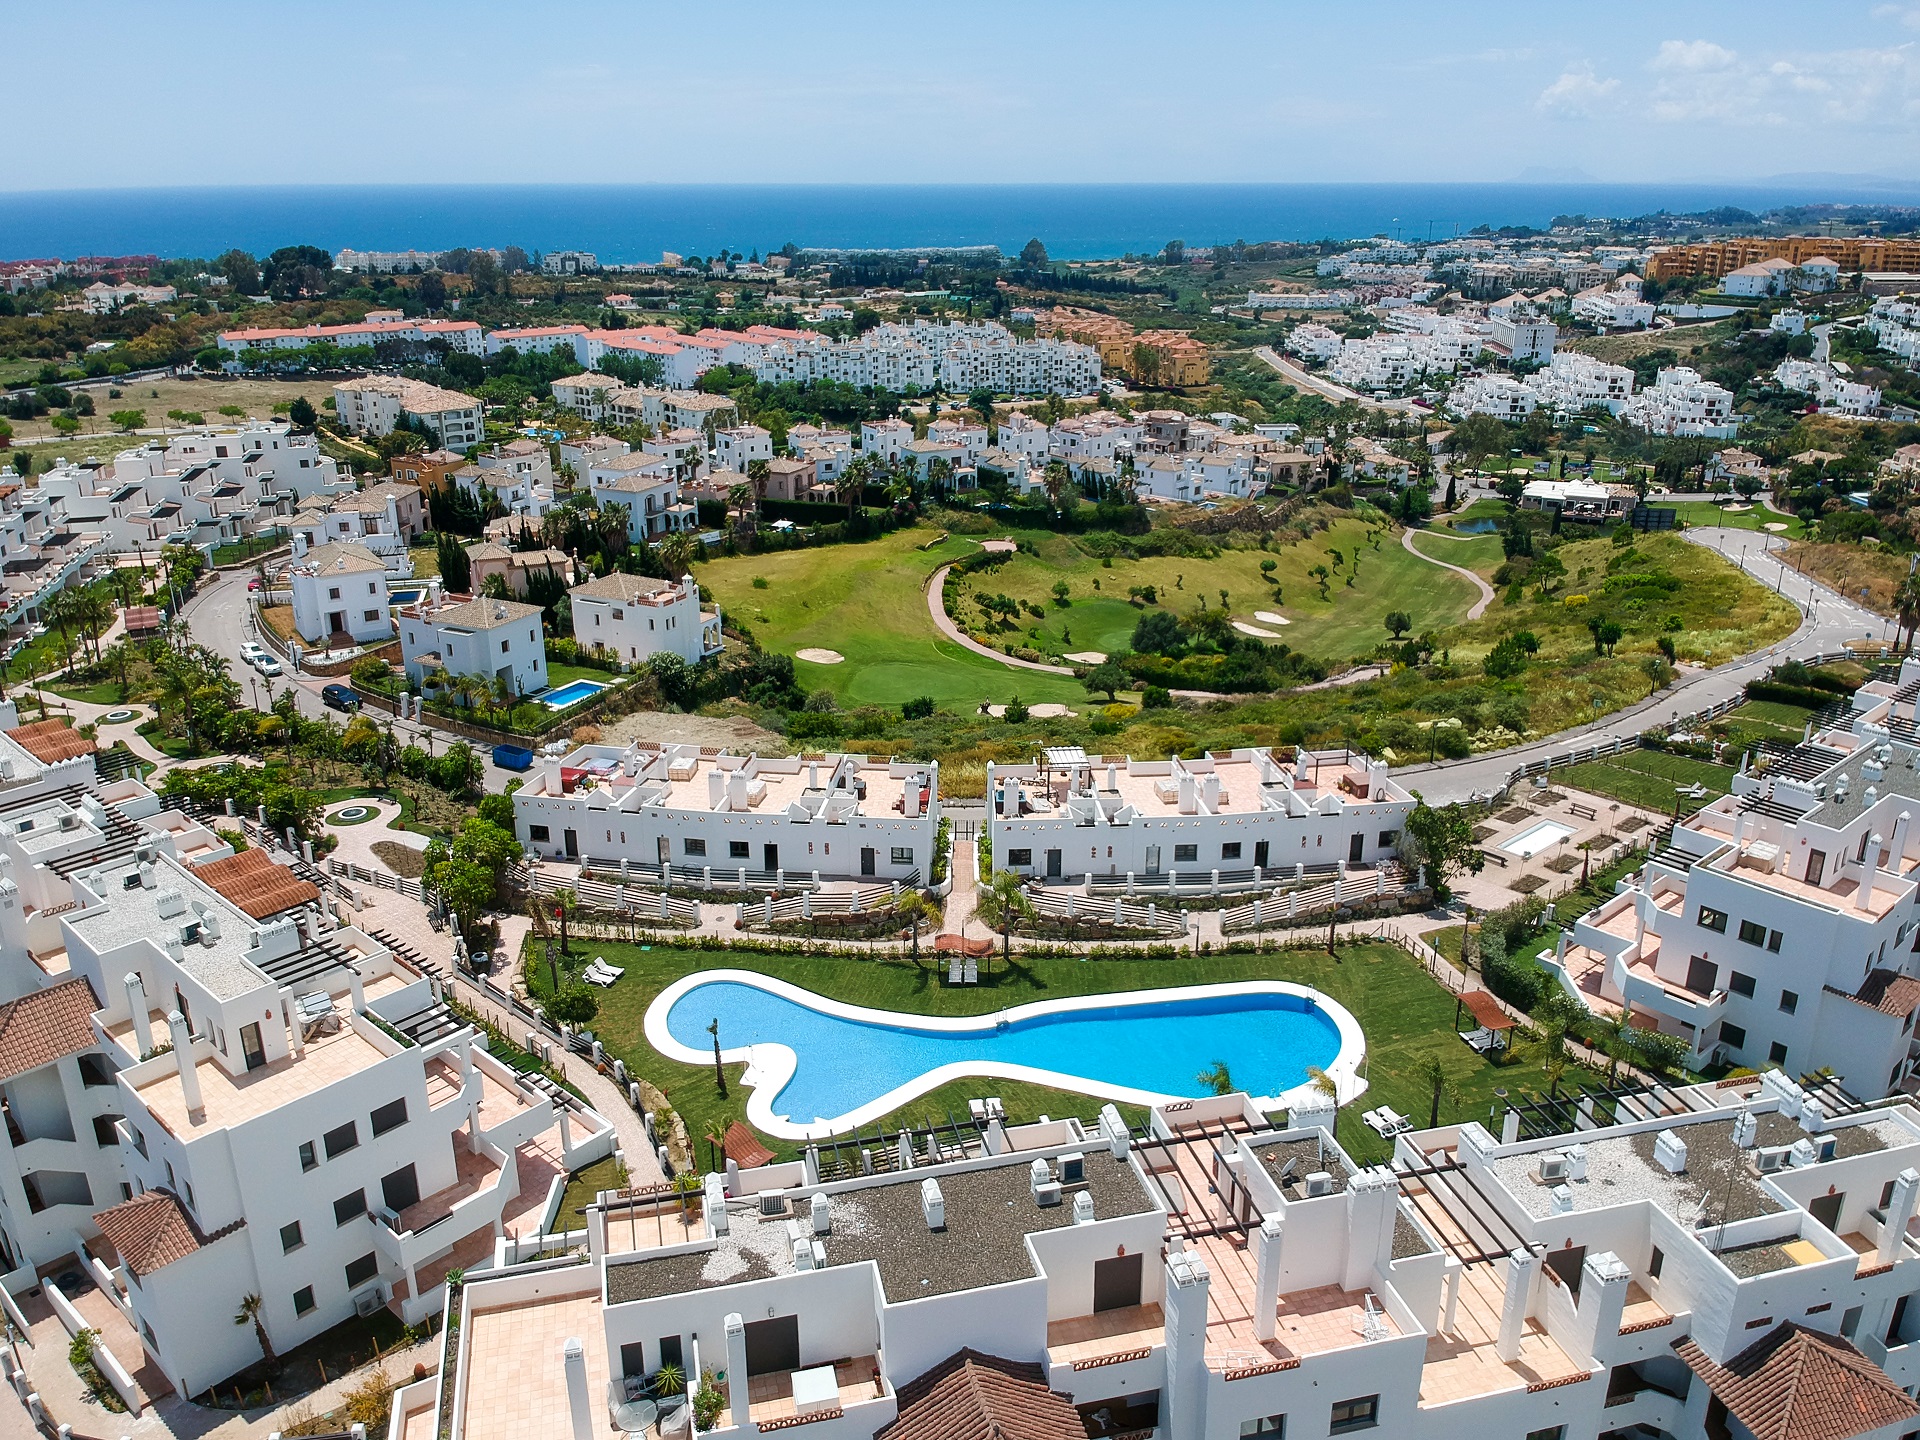 Duplex penthouse is just a short drive from Estepona's beautiful beaches